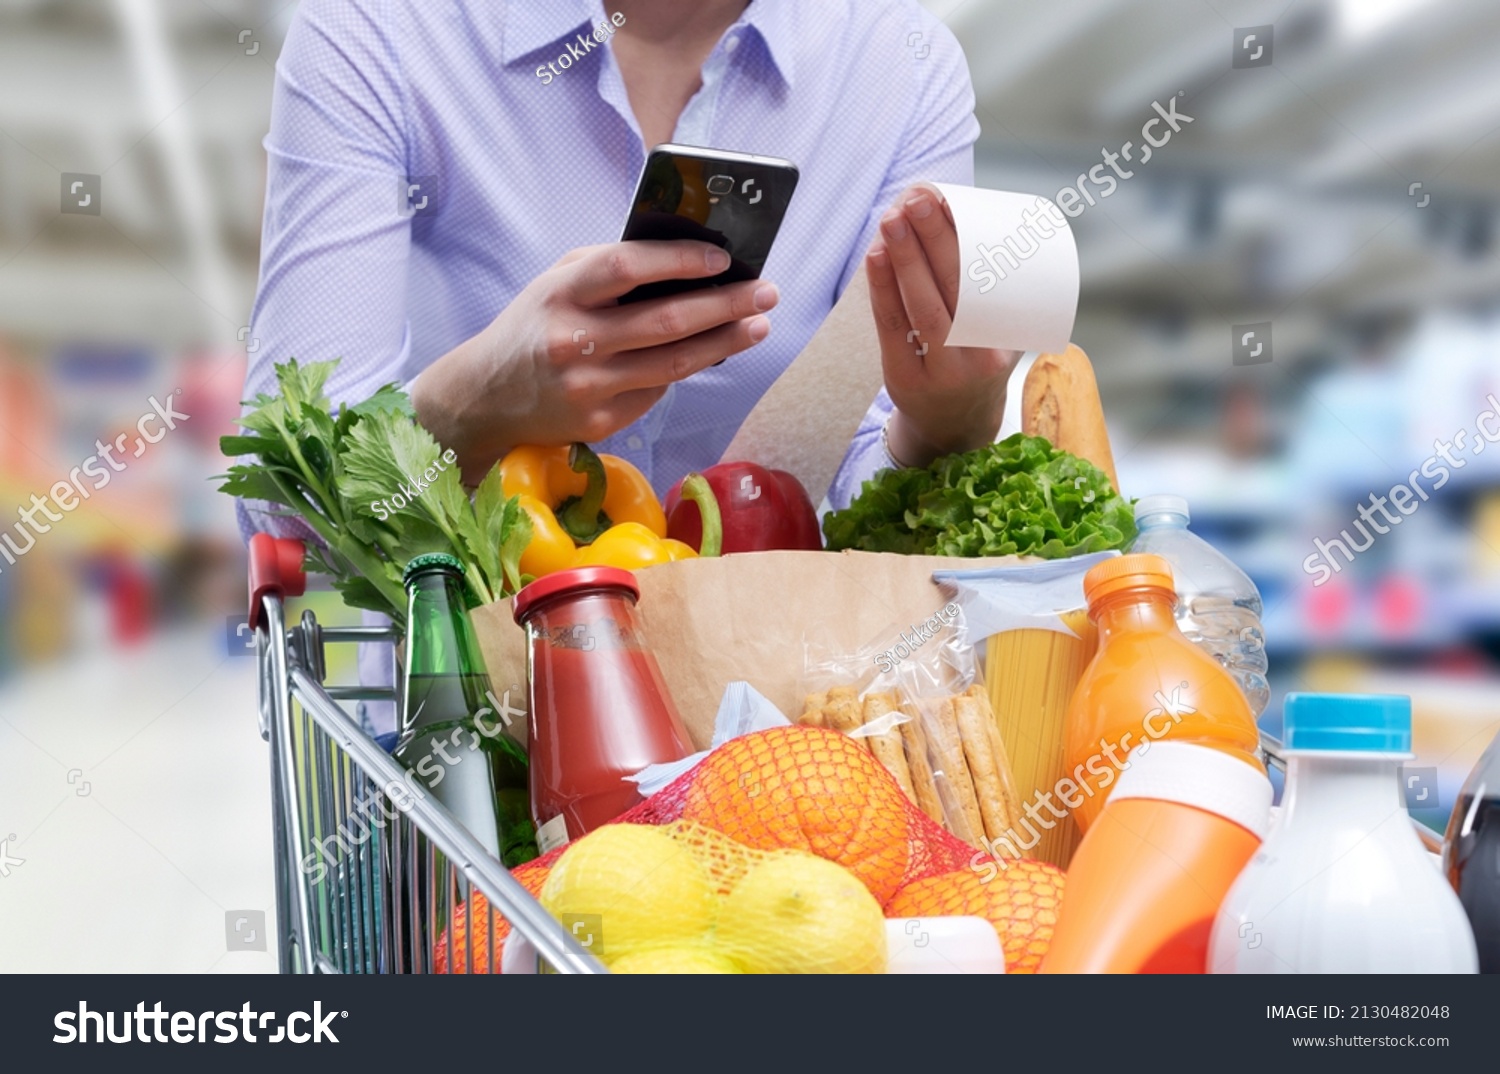 Woman checking the grocery receipt using her smartphone #2130482048